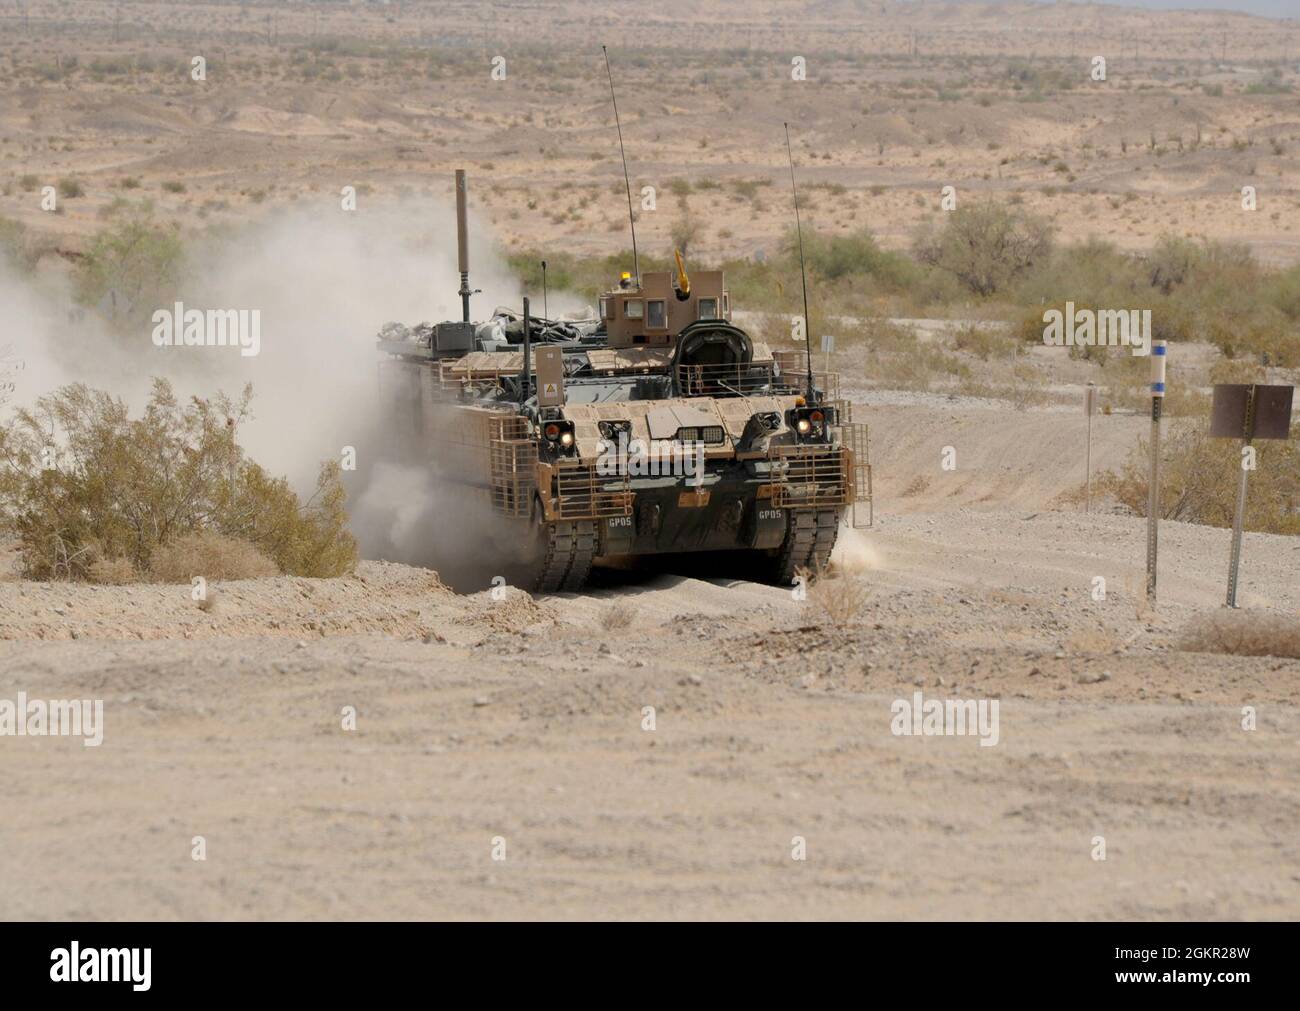 The recently developed Armored Multi-Purpose Vehicle (AMPV) incorporates a long list of upgrades that make it significantly more advanced than its predecessor, the M113 Armored Personnel Carrier.    Currently, multiple AMPVs are undergoing reliability, availability, and maintainability (RAM) testing at U.S. Army Yuma Proving Ground (YPG), with each running many miles of simulated missions across road courses featuring various terrain conditions, from paved to gravel to punishing desert washboard that would severely rattle less robust vehicles. Stock Photo